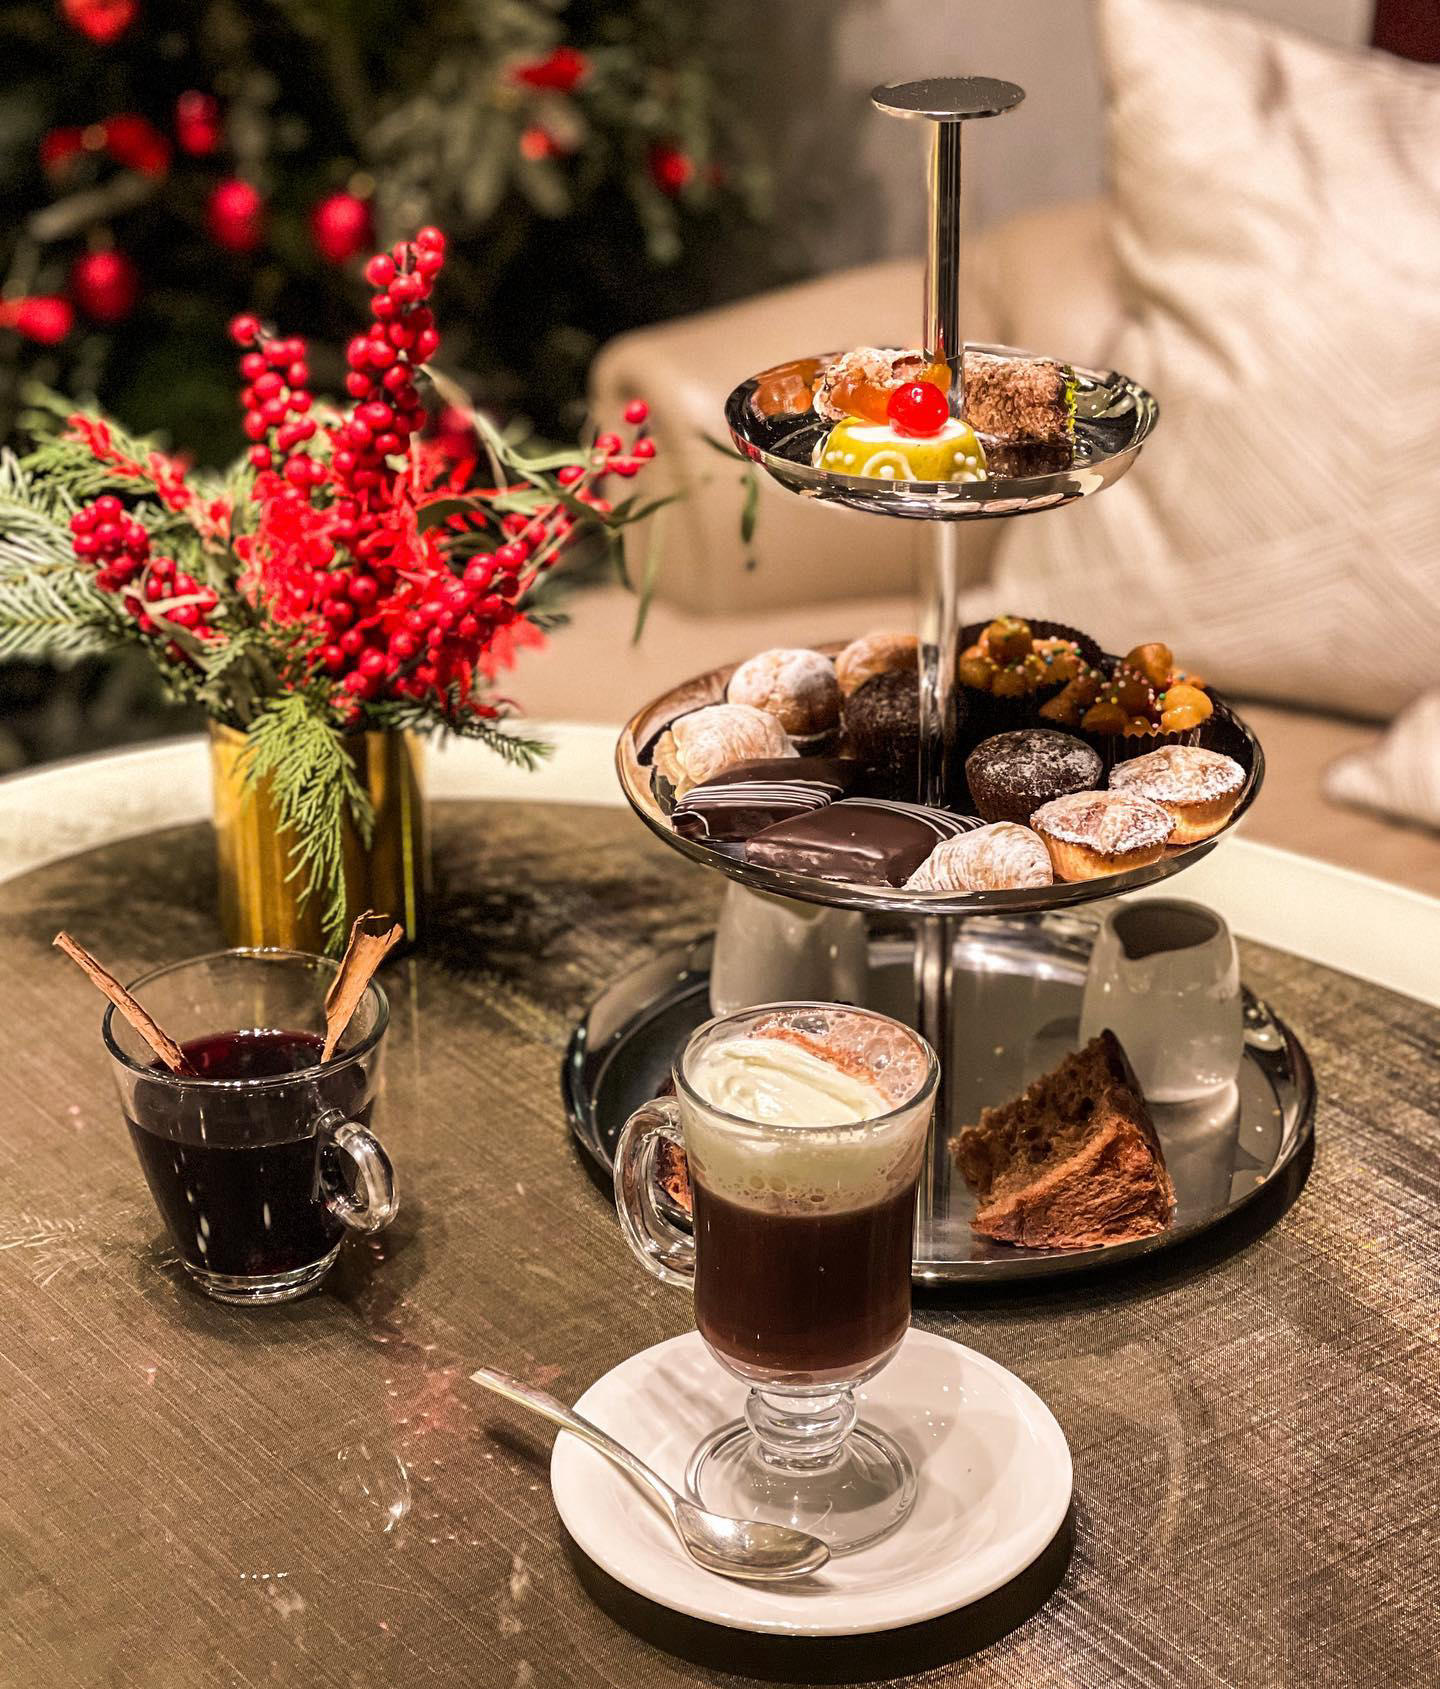 Excelsior Hotel Gallia, Milan - Enjoy the last days of the festive season with the Grand Merenda di